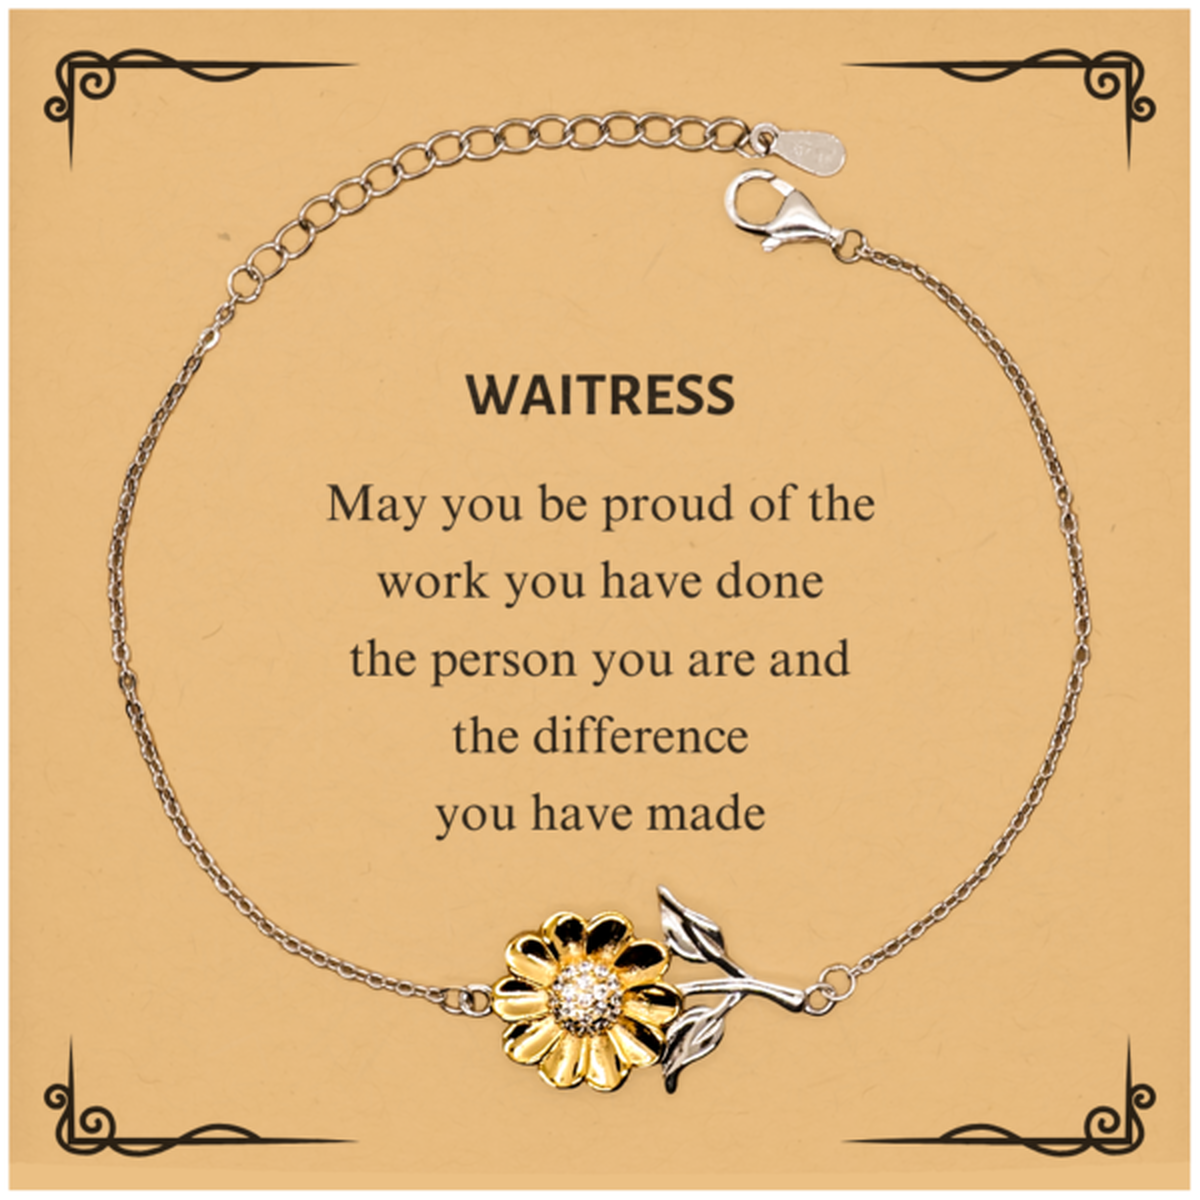 Waitress May you be proud of the work you have done, Retirement Waitress Sunflower Bracelet for Colleague Appreciation Gifts Amazing for Waitress